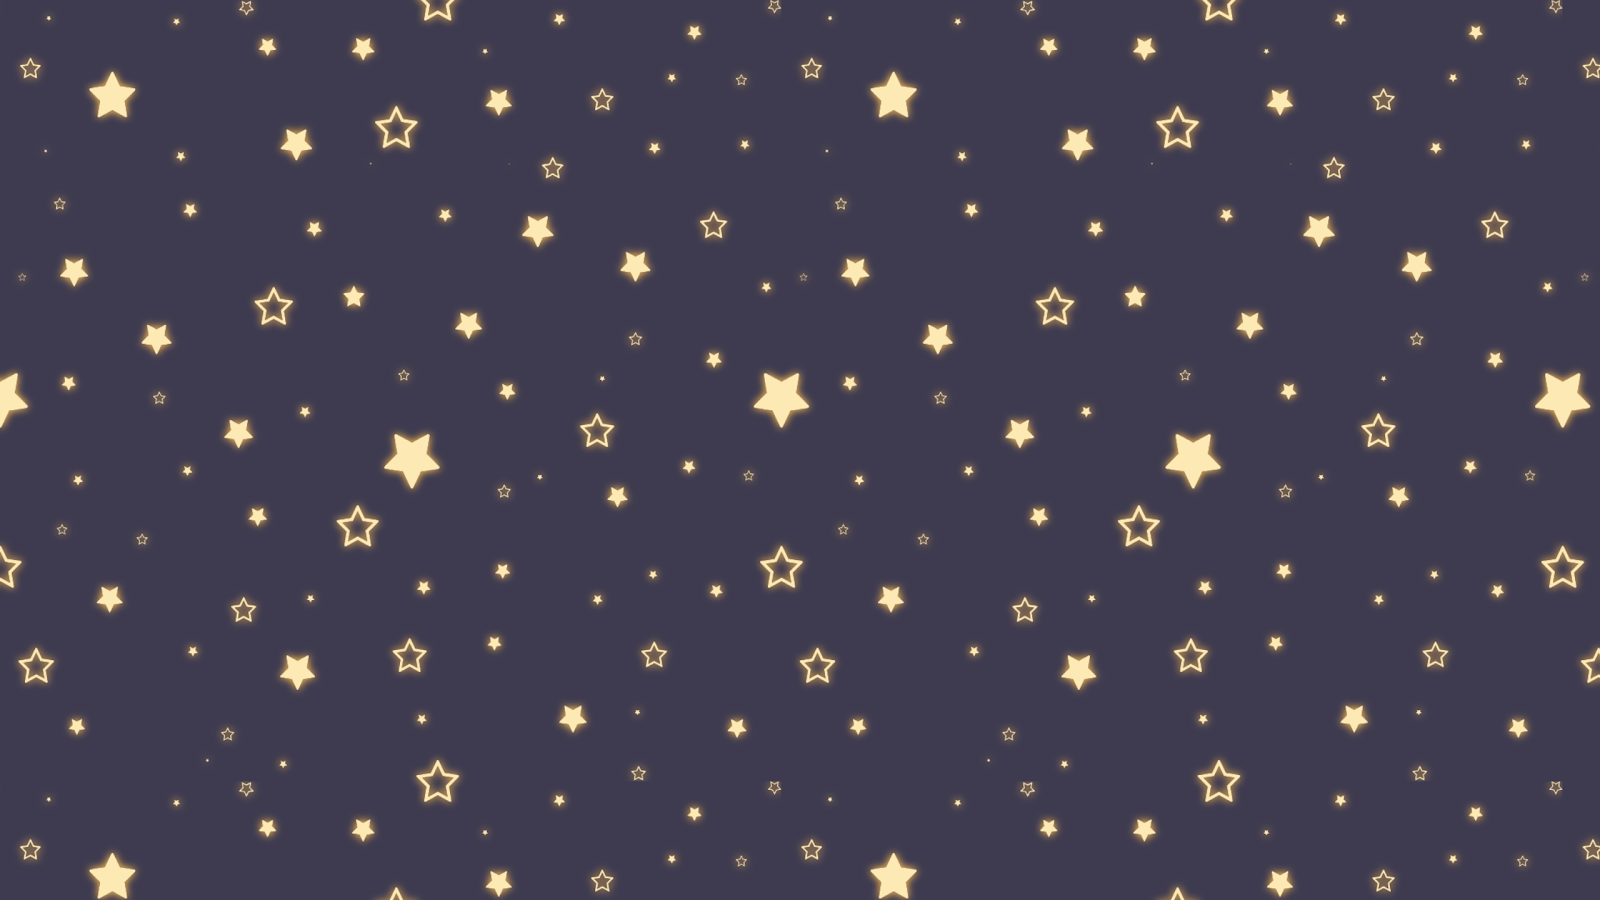 Design A Glowing Star Pattern And Turn It Into Background